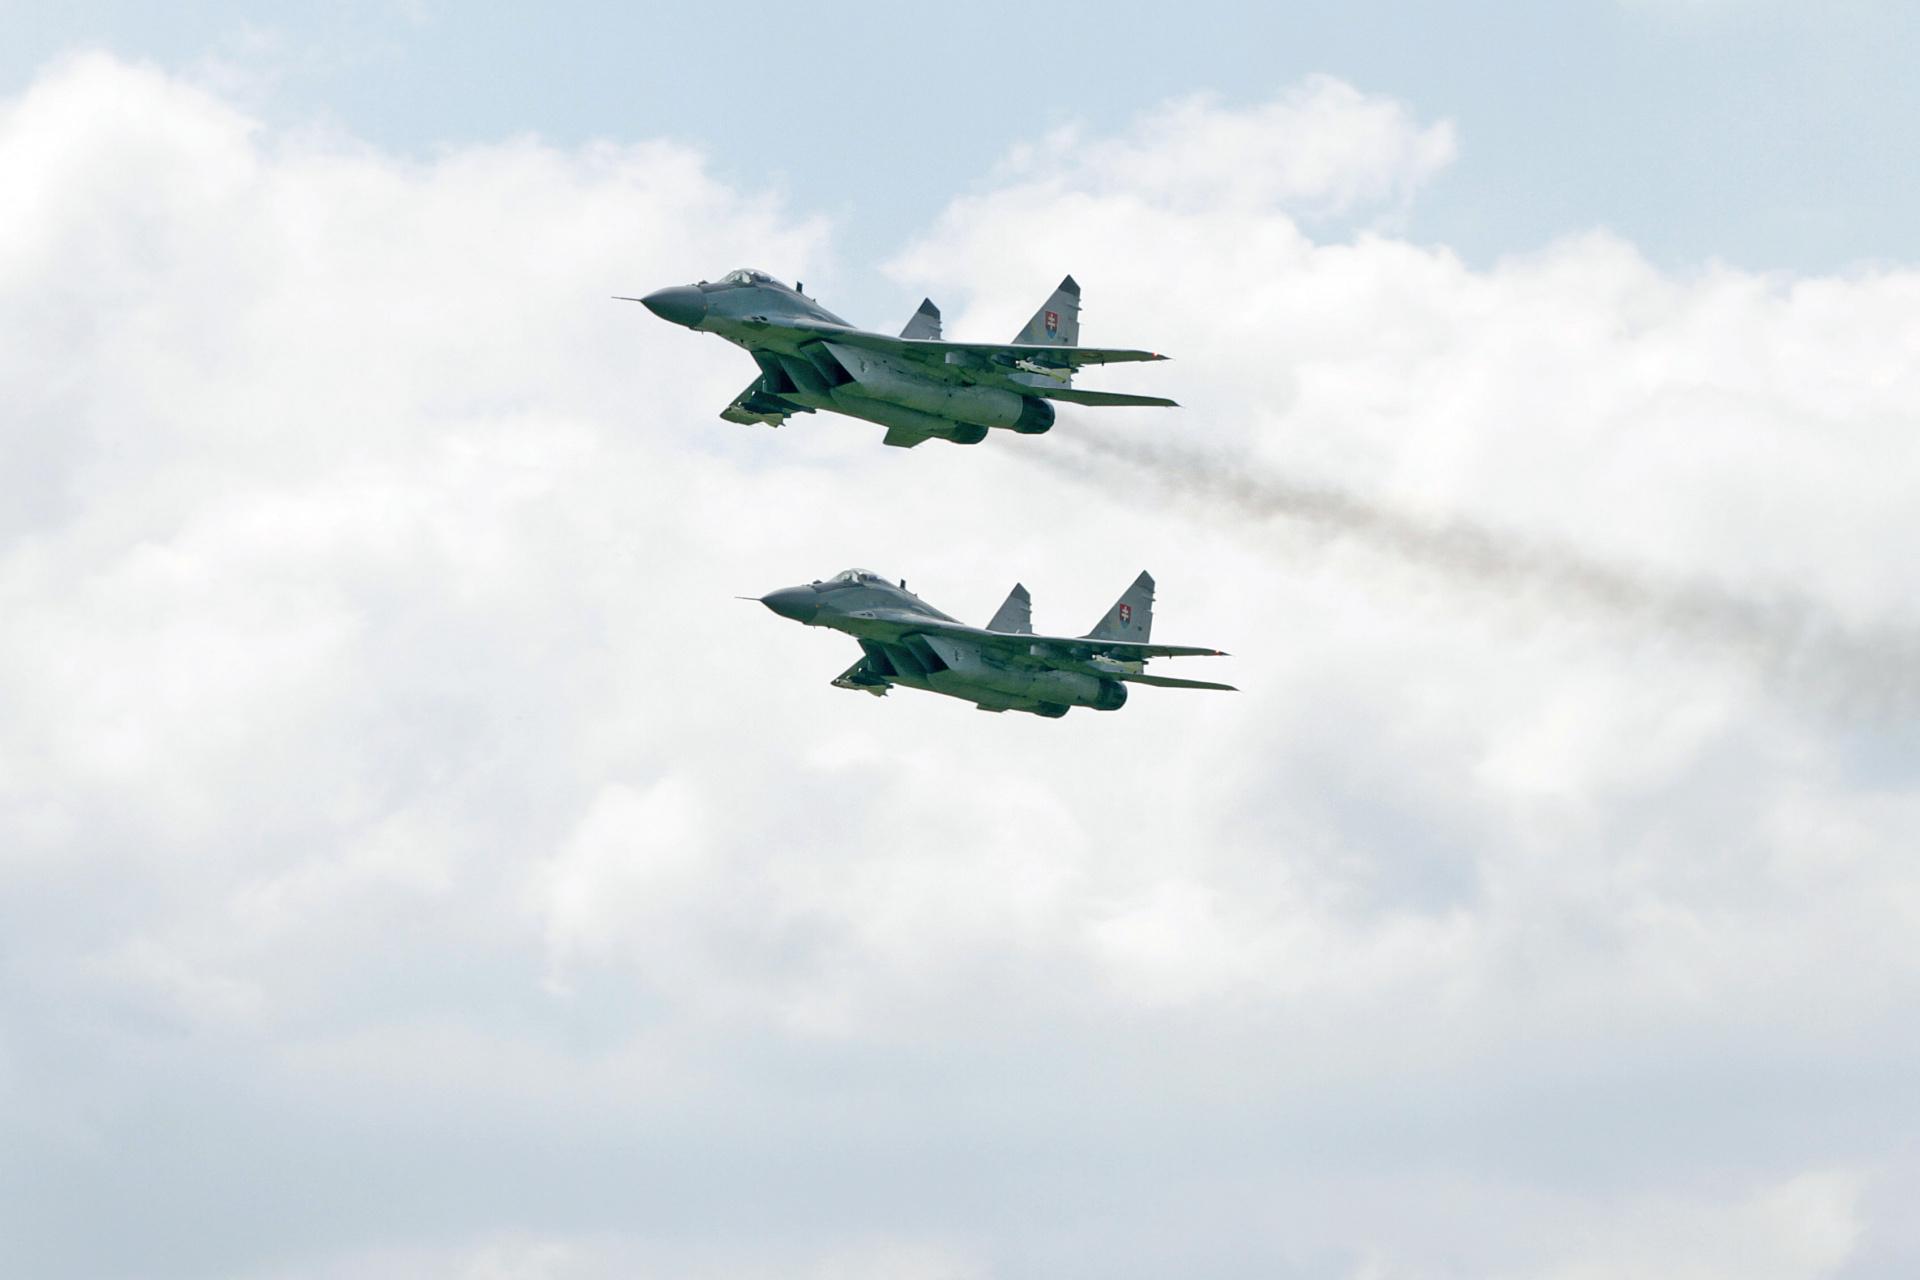 The first 4 MiG-29 fighter jets are already in Ukraine